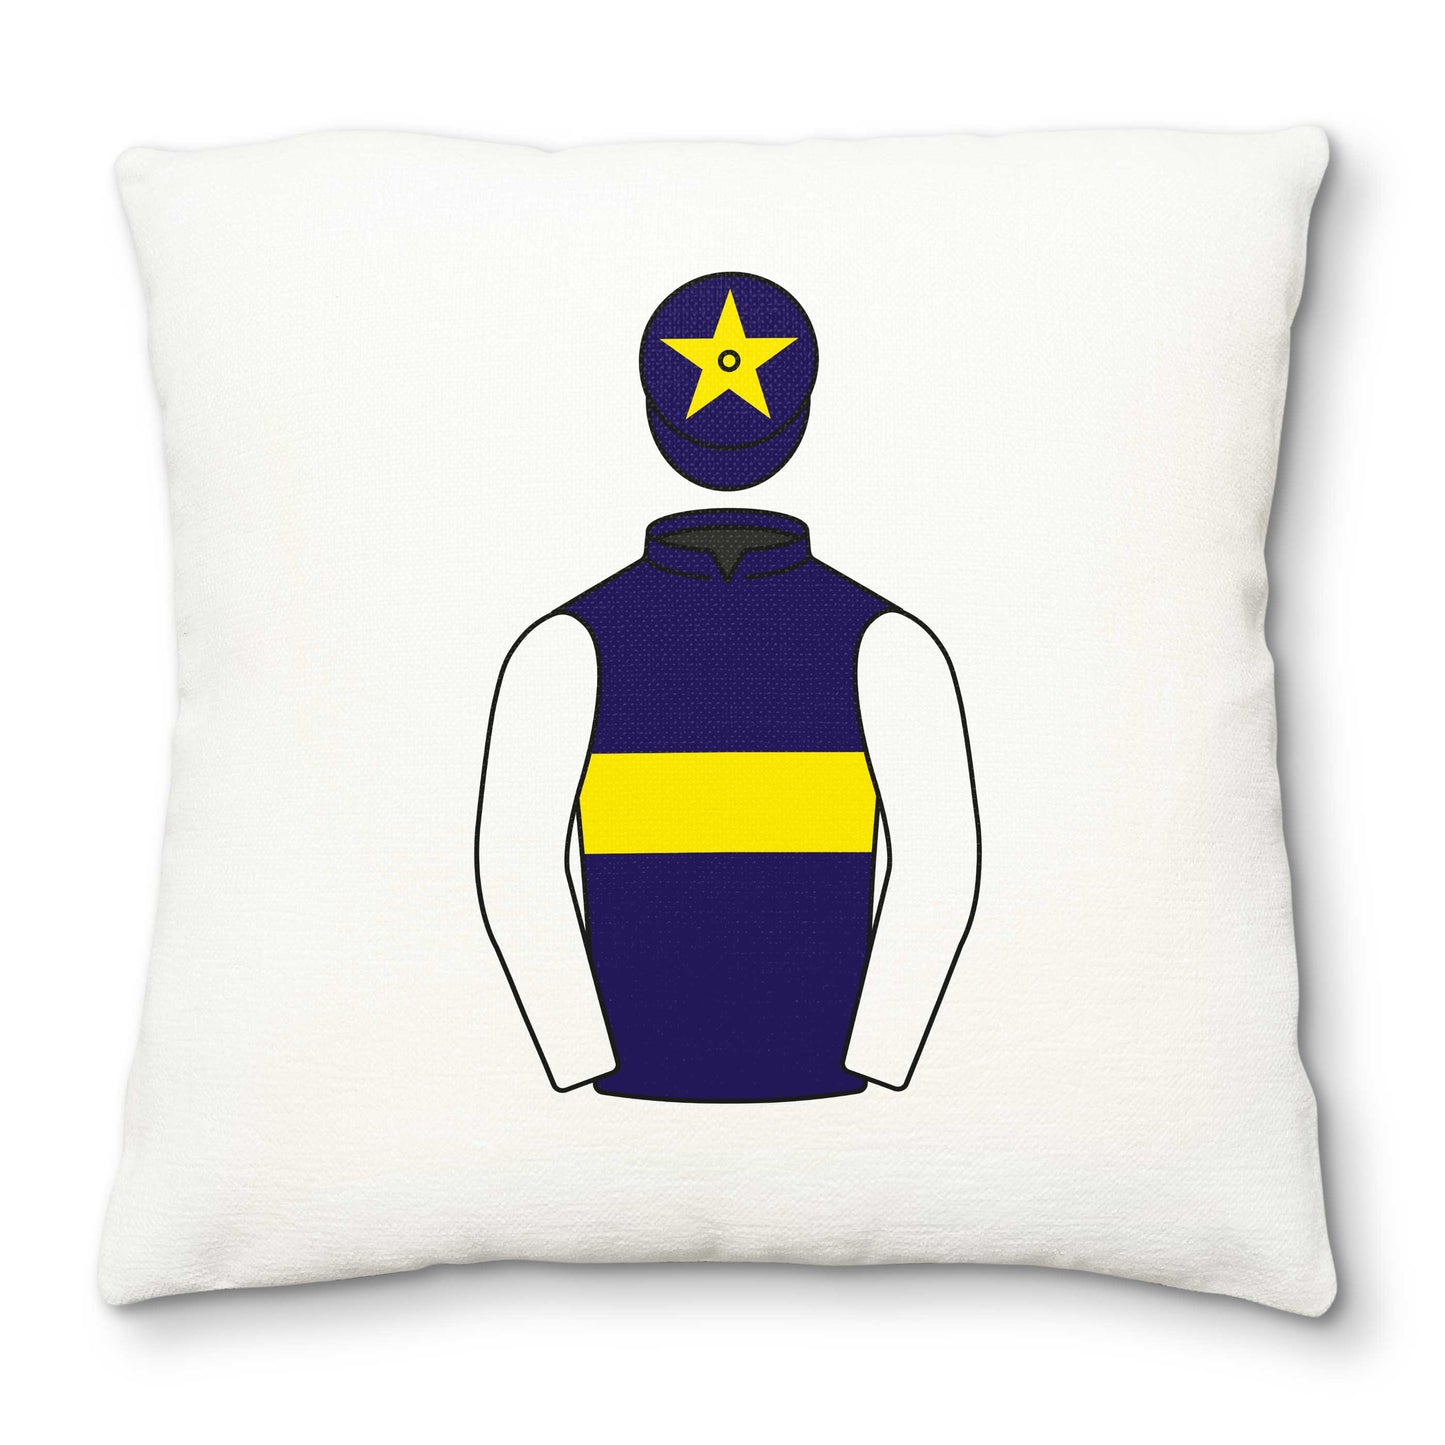 Bruton Street V Club Deluxe Cushion Cover - Deluxe Cushion Cover - Hacked Up